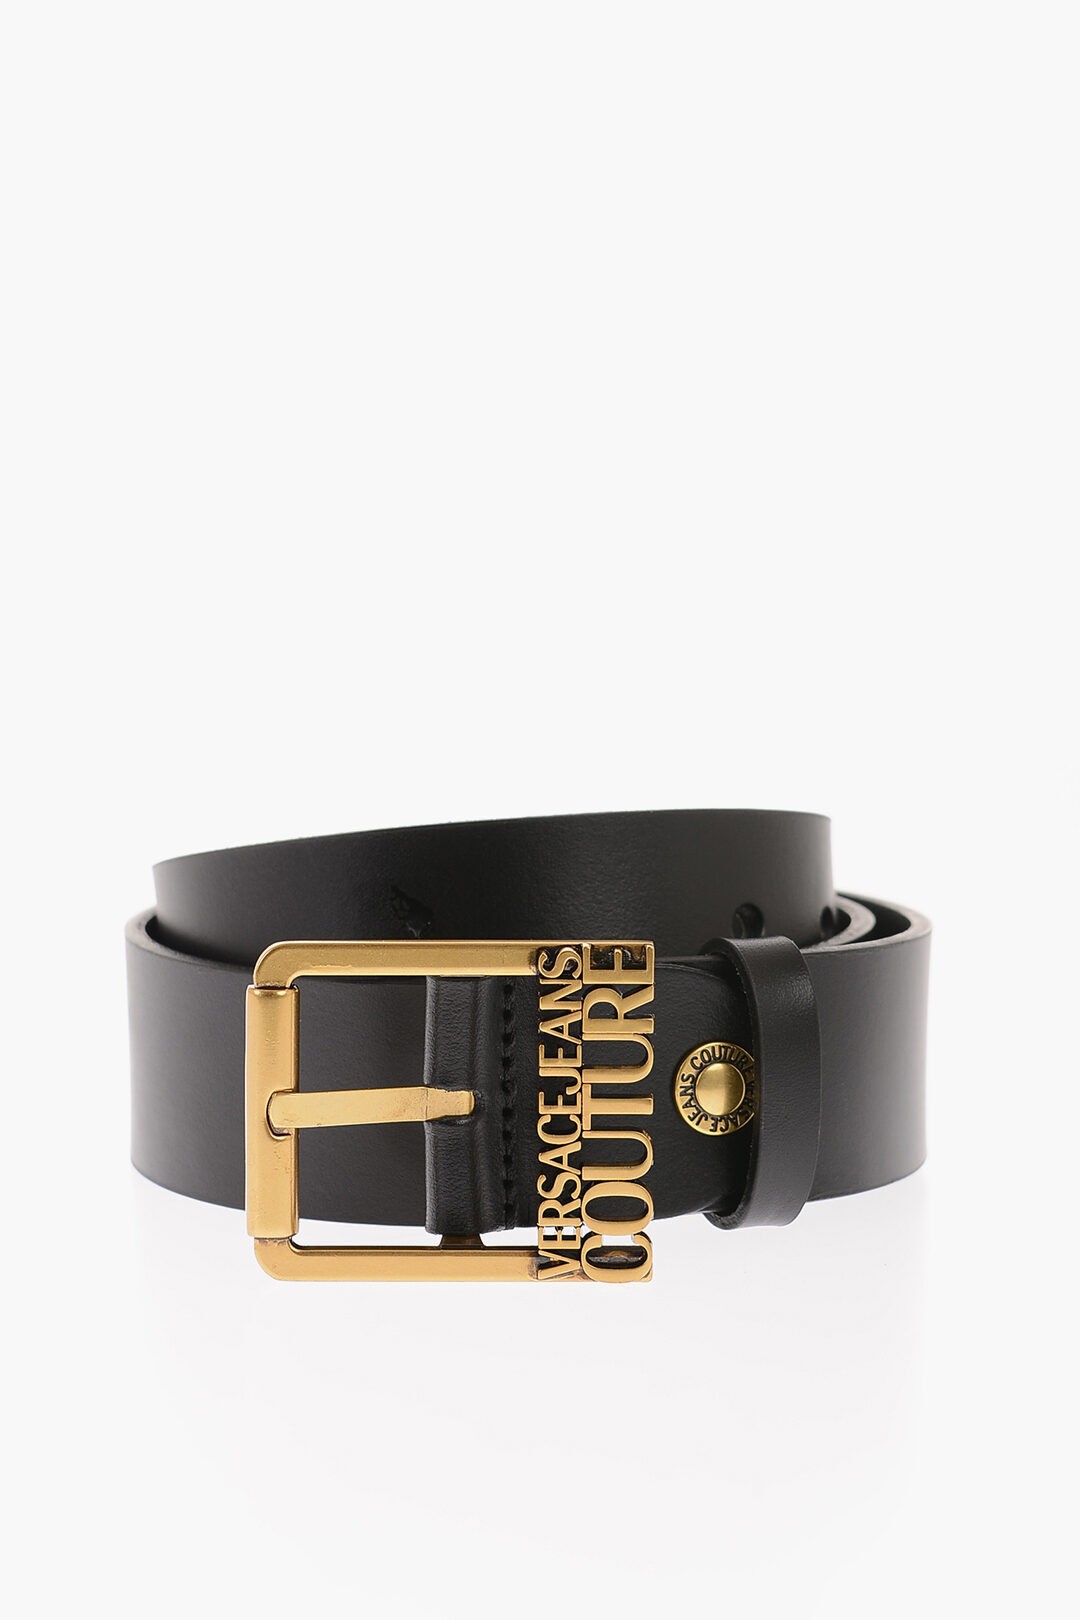 VERSACE ヴェルサーチ ベルト 74YA6F13 ZP228 PK3 メンズ JEANS COUTURE LEATHER BELT WITH GOLDEN BUCKLE 40MM 【関税・送料無料】【ラッピング無料】 dk